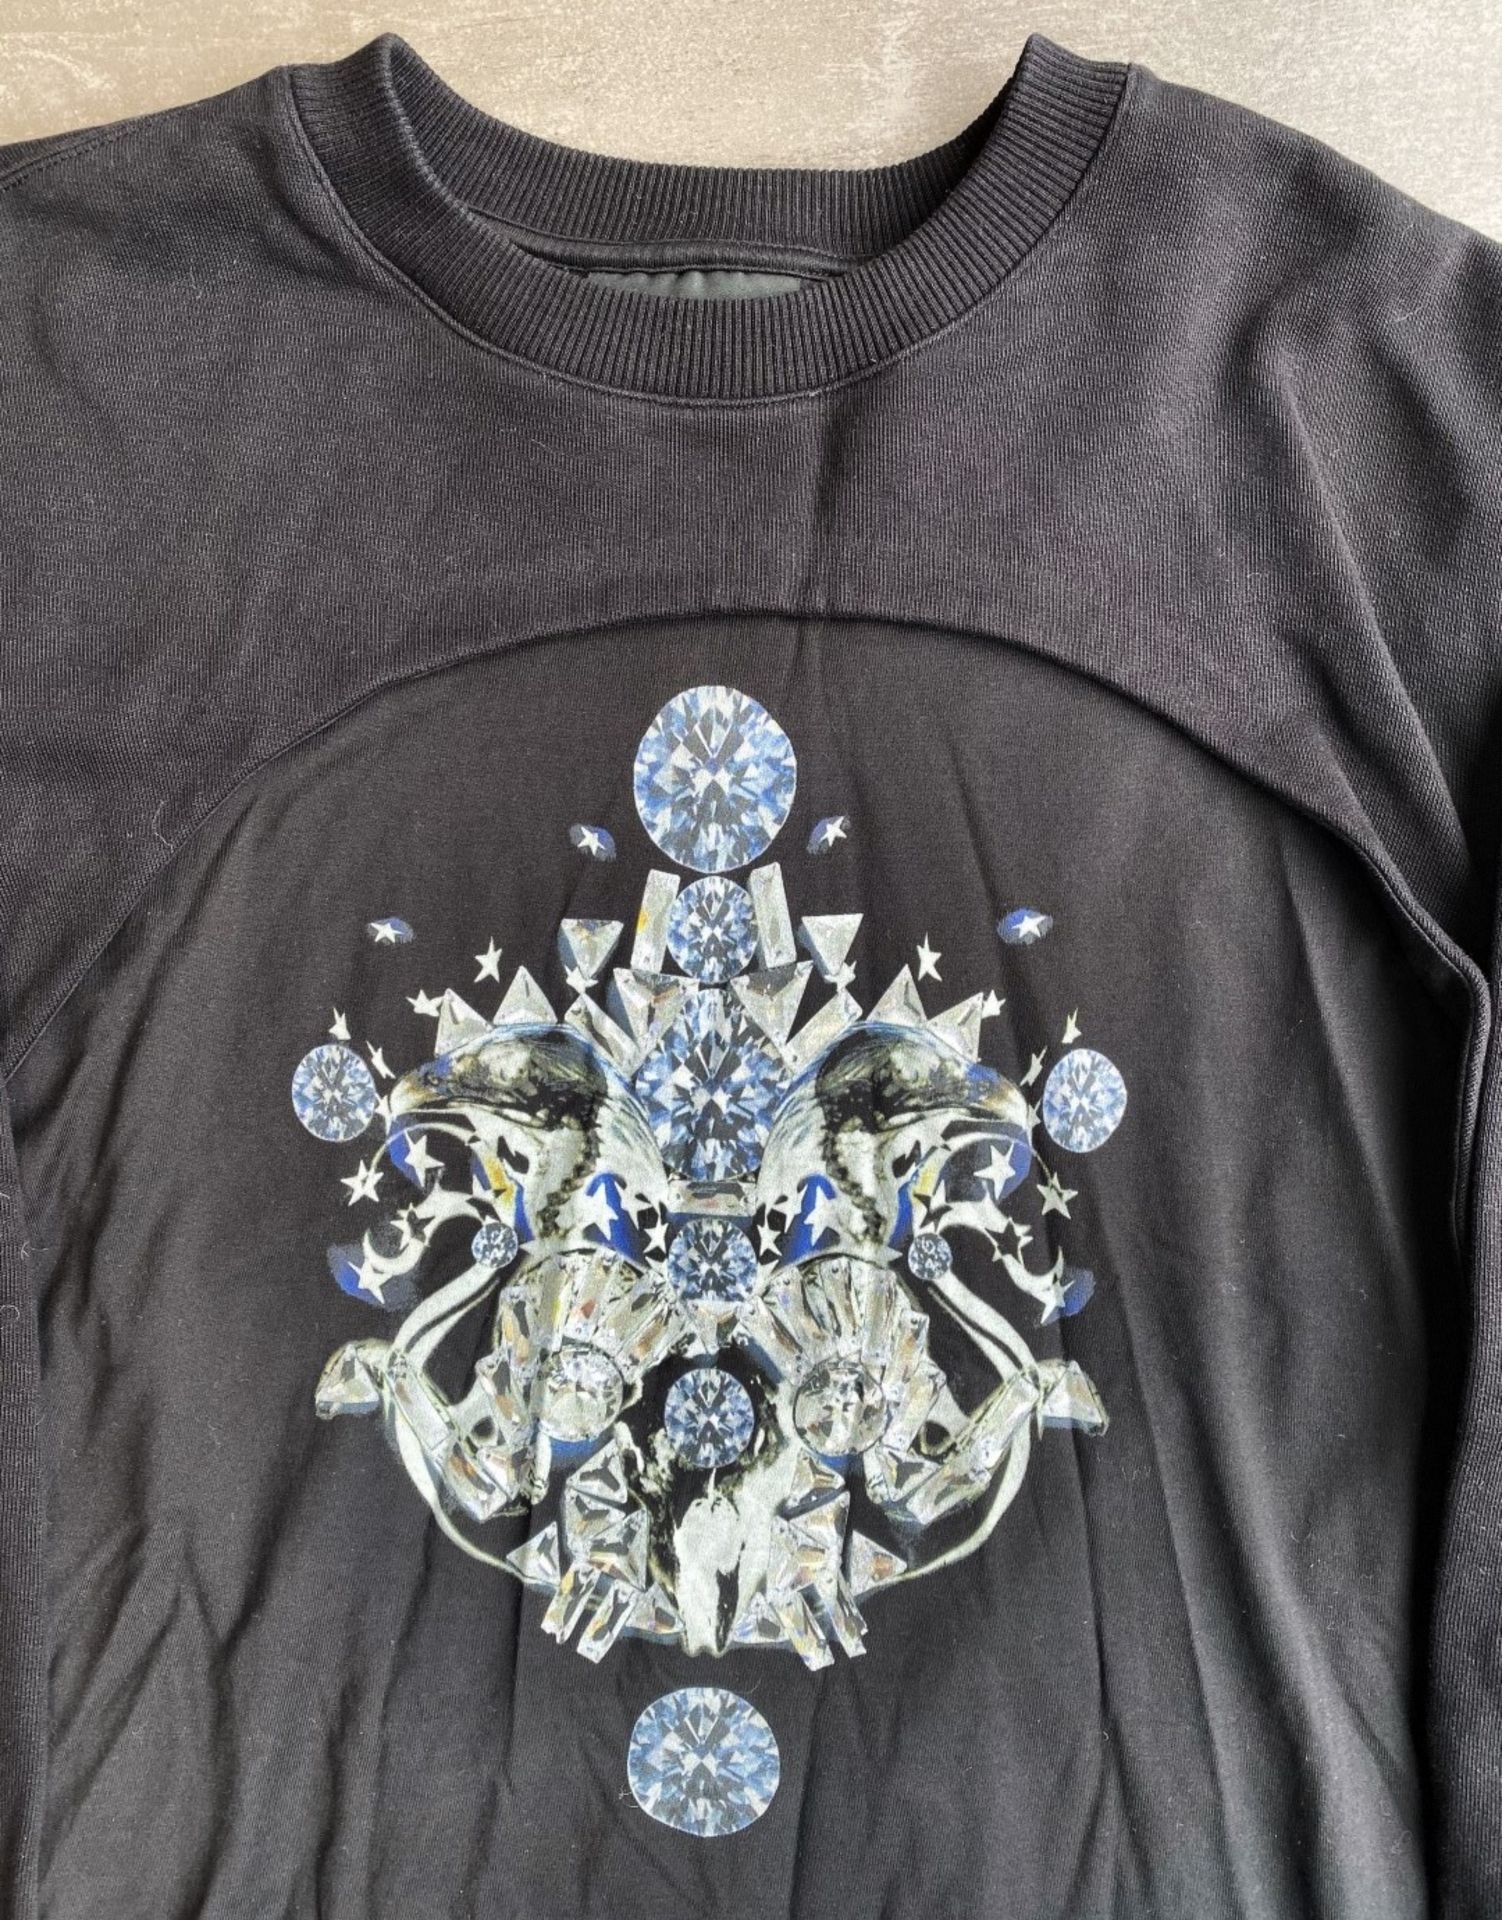 1 x Men's Genuine Givenchy Sweatshirt Top In Black - Size: Medium - Preowned In Very Good - Image 6 of 7